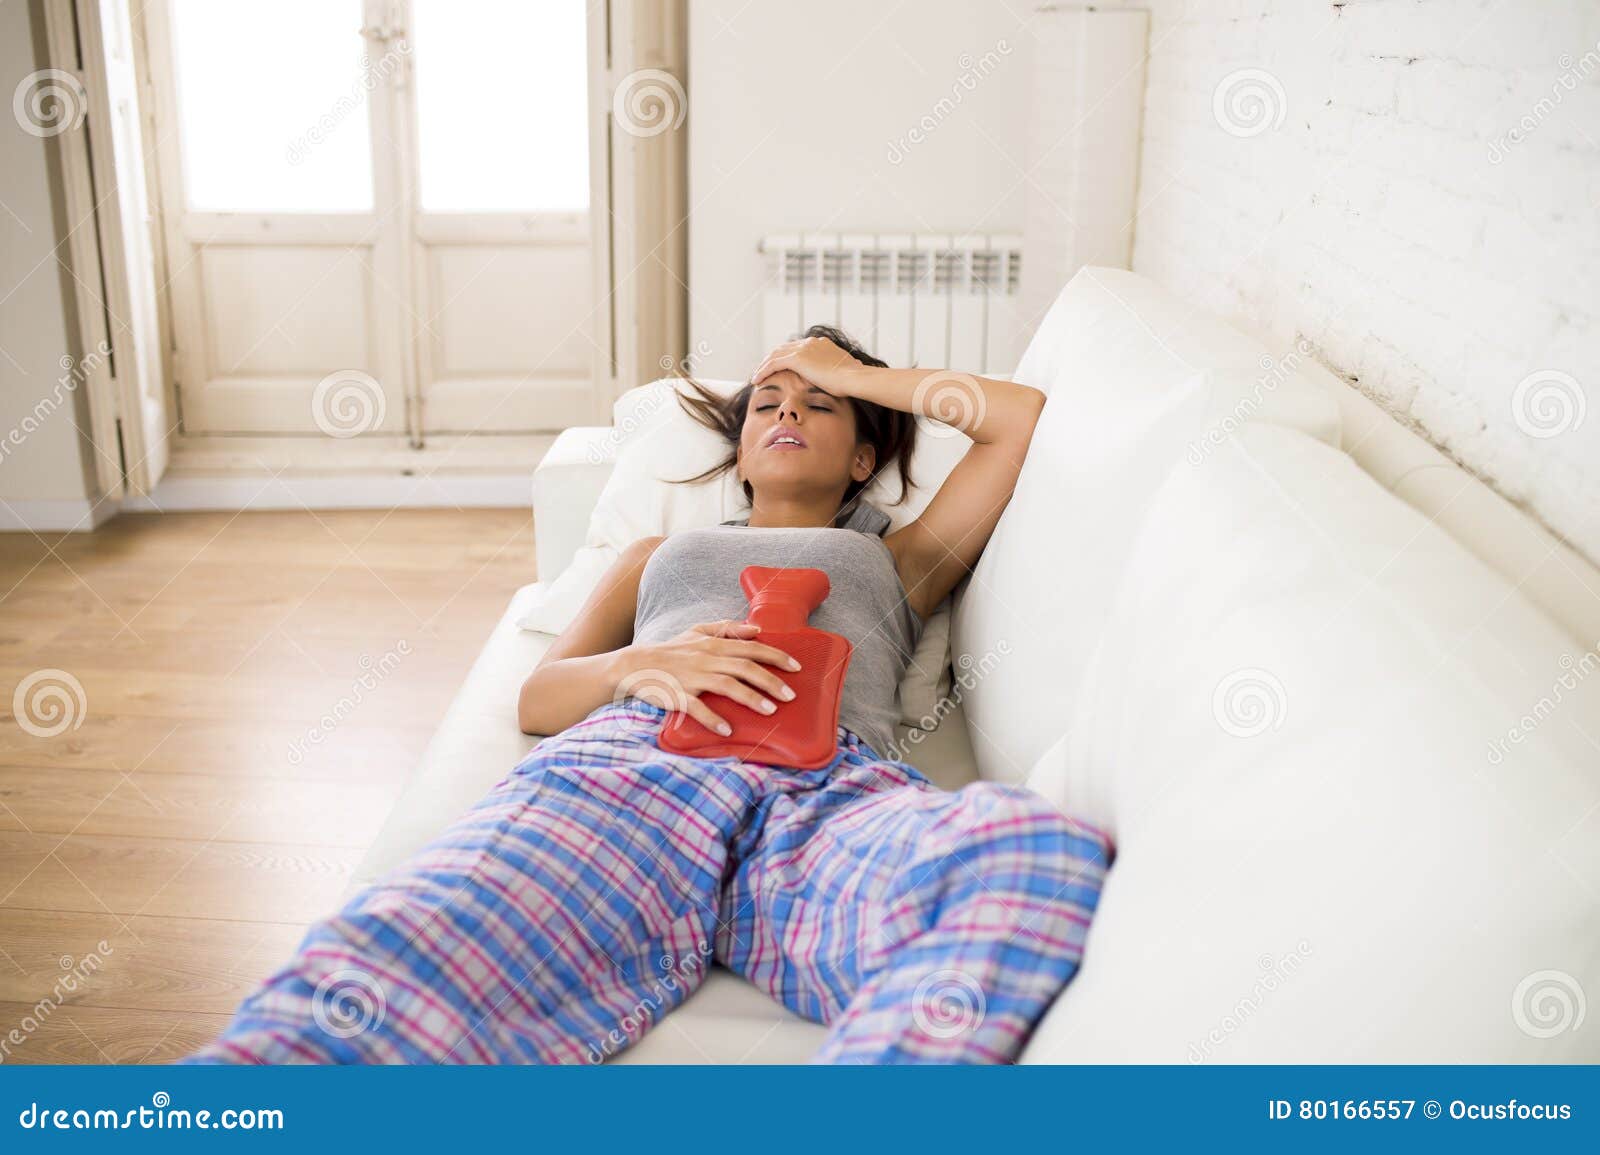 young beautiful hispanic woman holding hot water bottle against belly suffering menstrual period pain